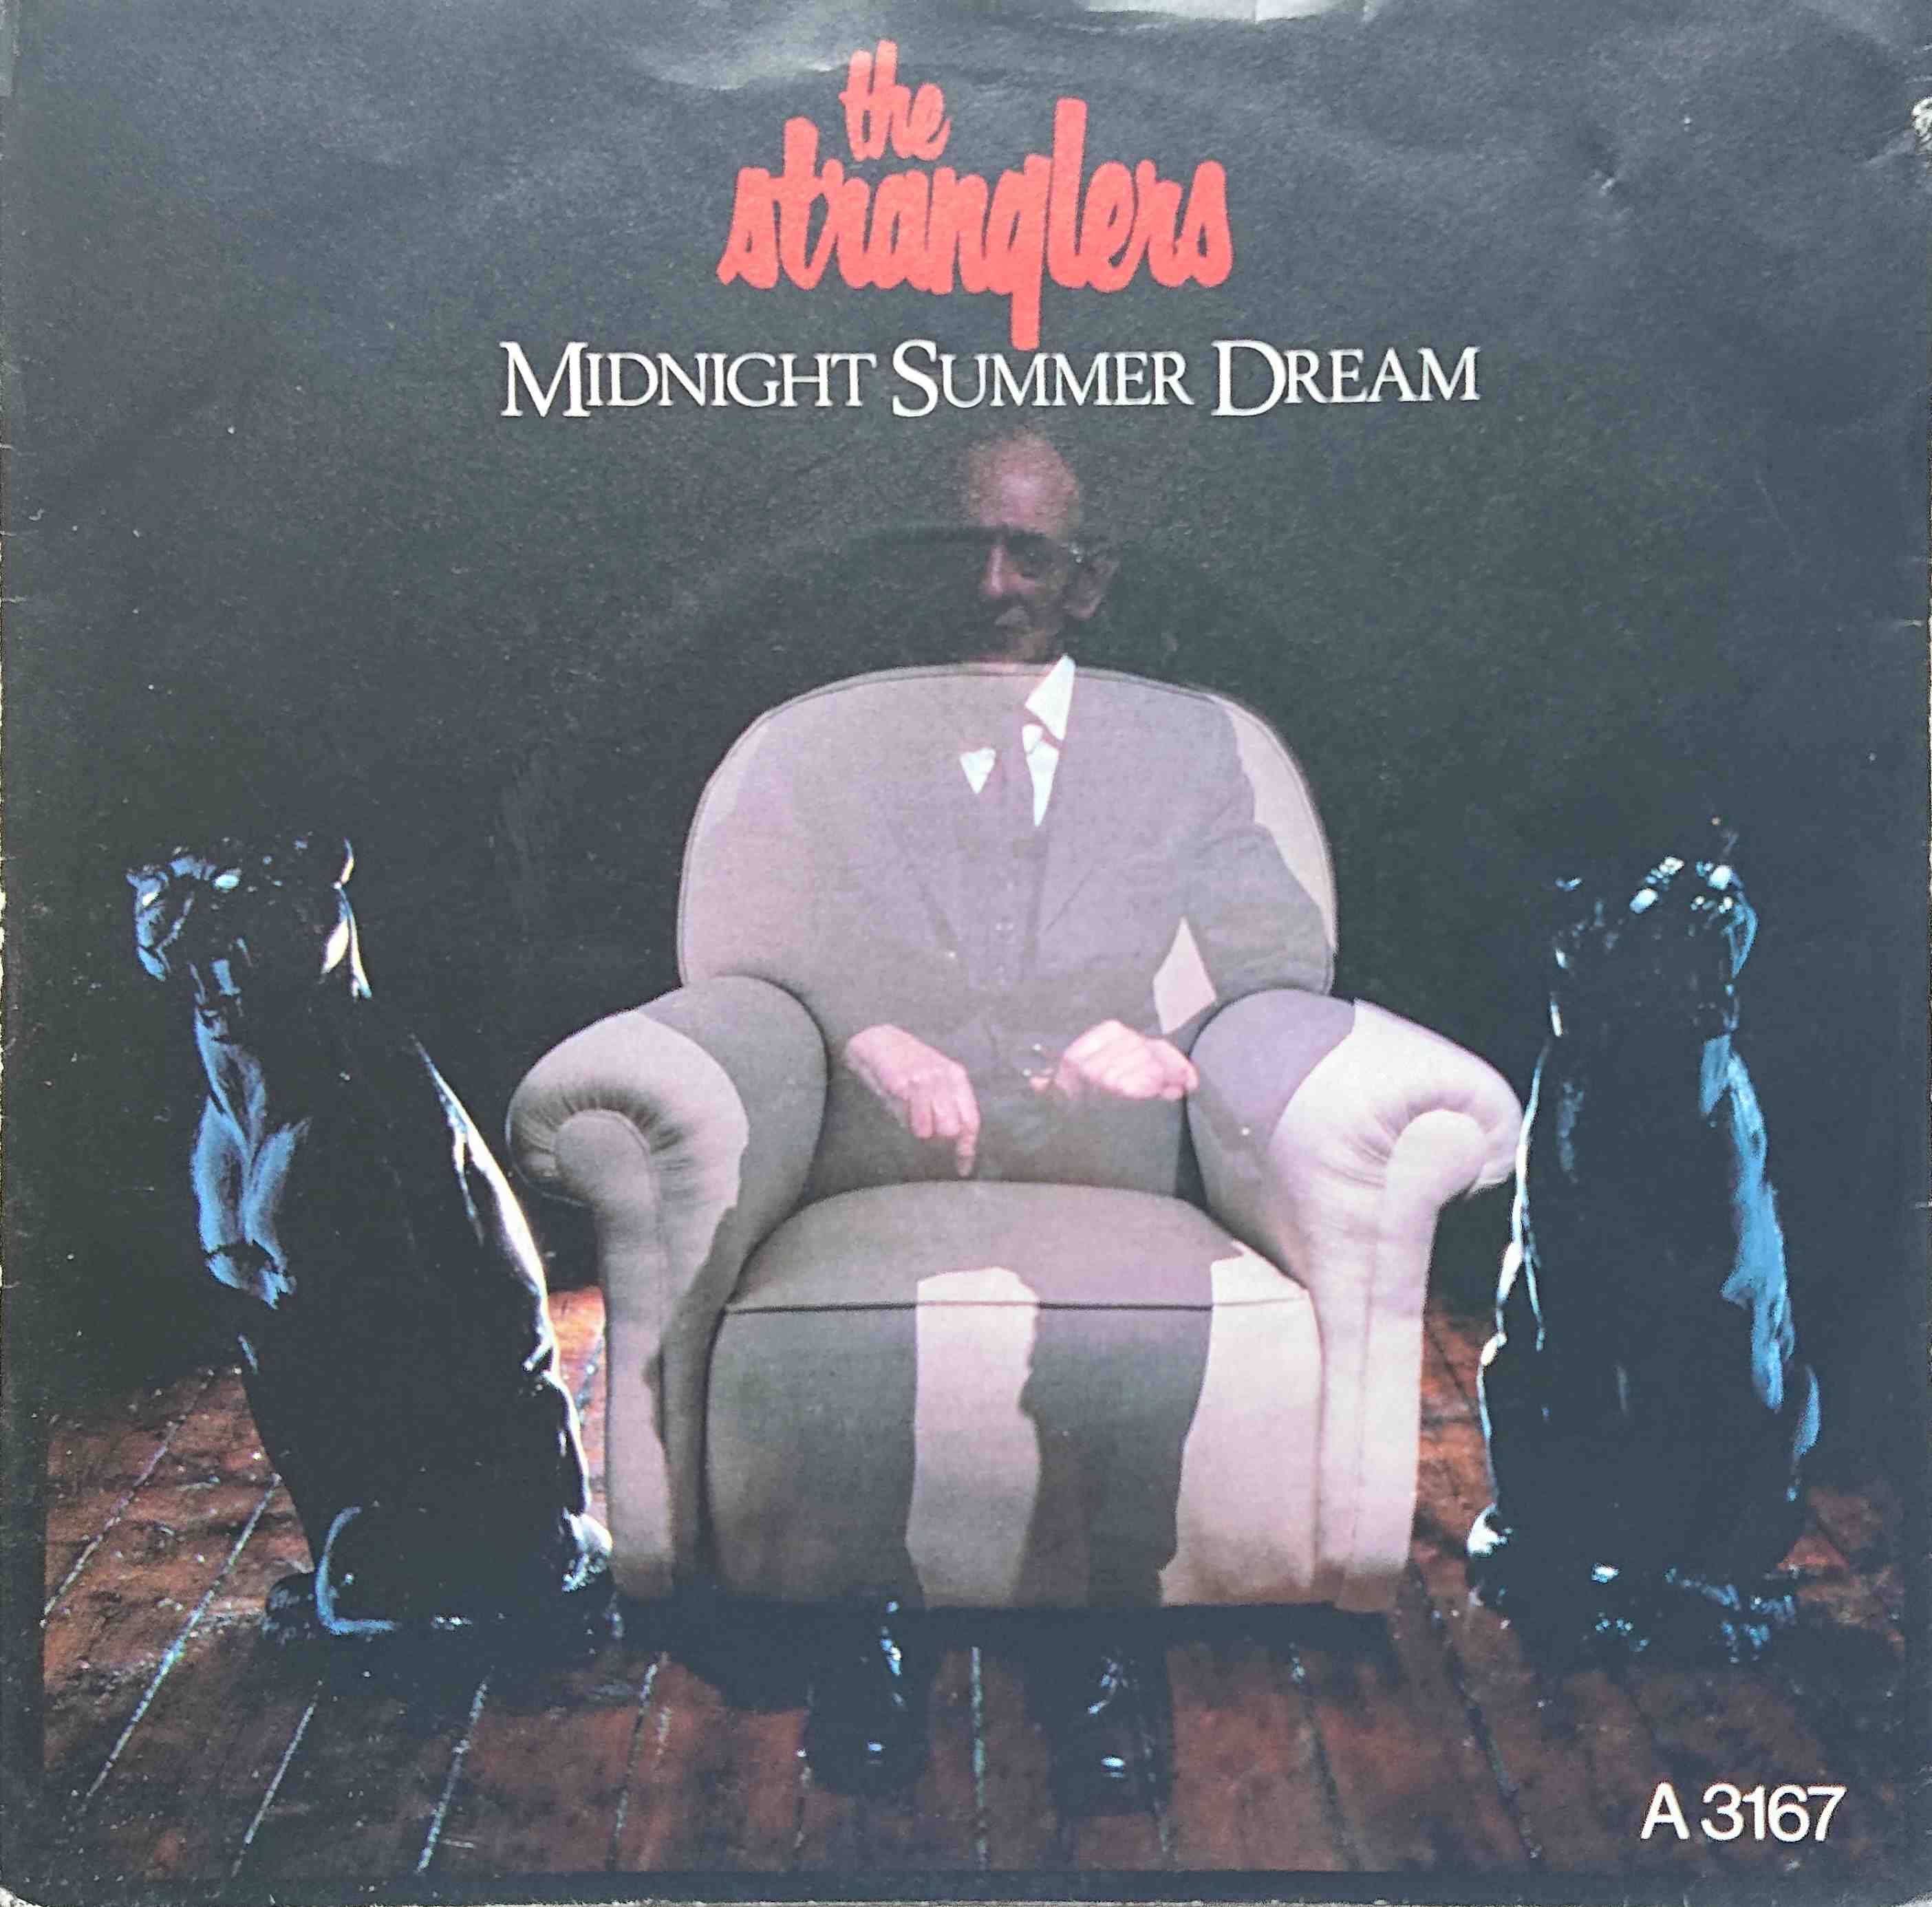 Picture of Midnight summer dream by artist The Stranglers  from The Stranglers singles